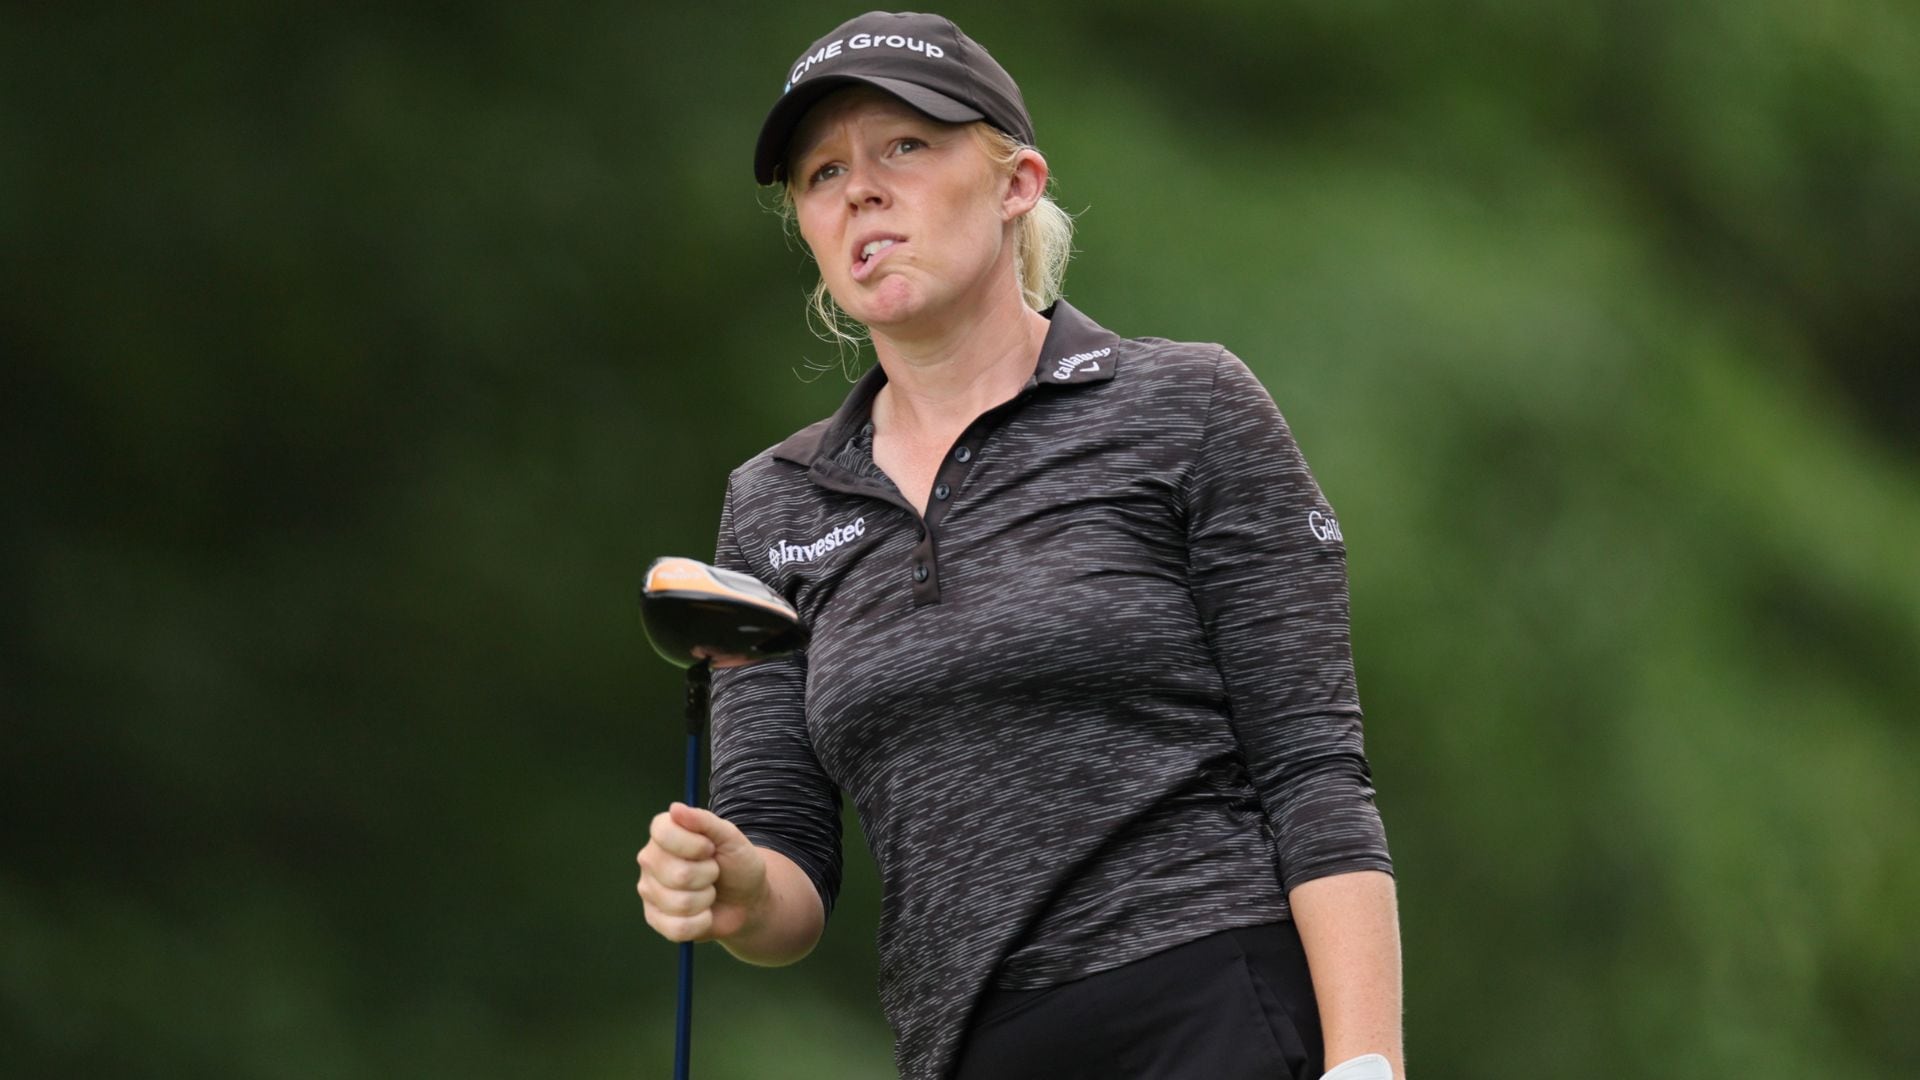 Stephanie Meadow tops shot on 72nd hole with chance to tie 2023 KPMG Women’s PGA Championship lead